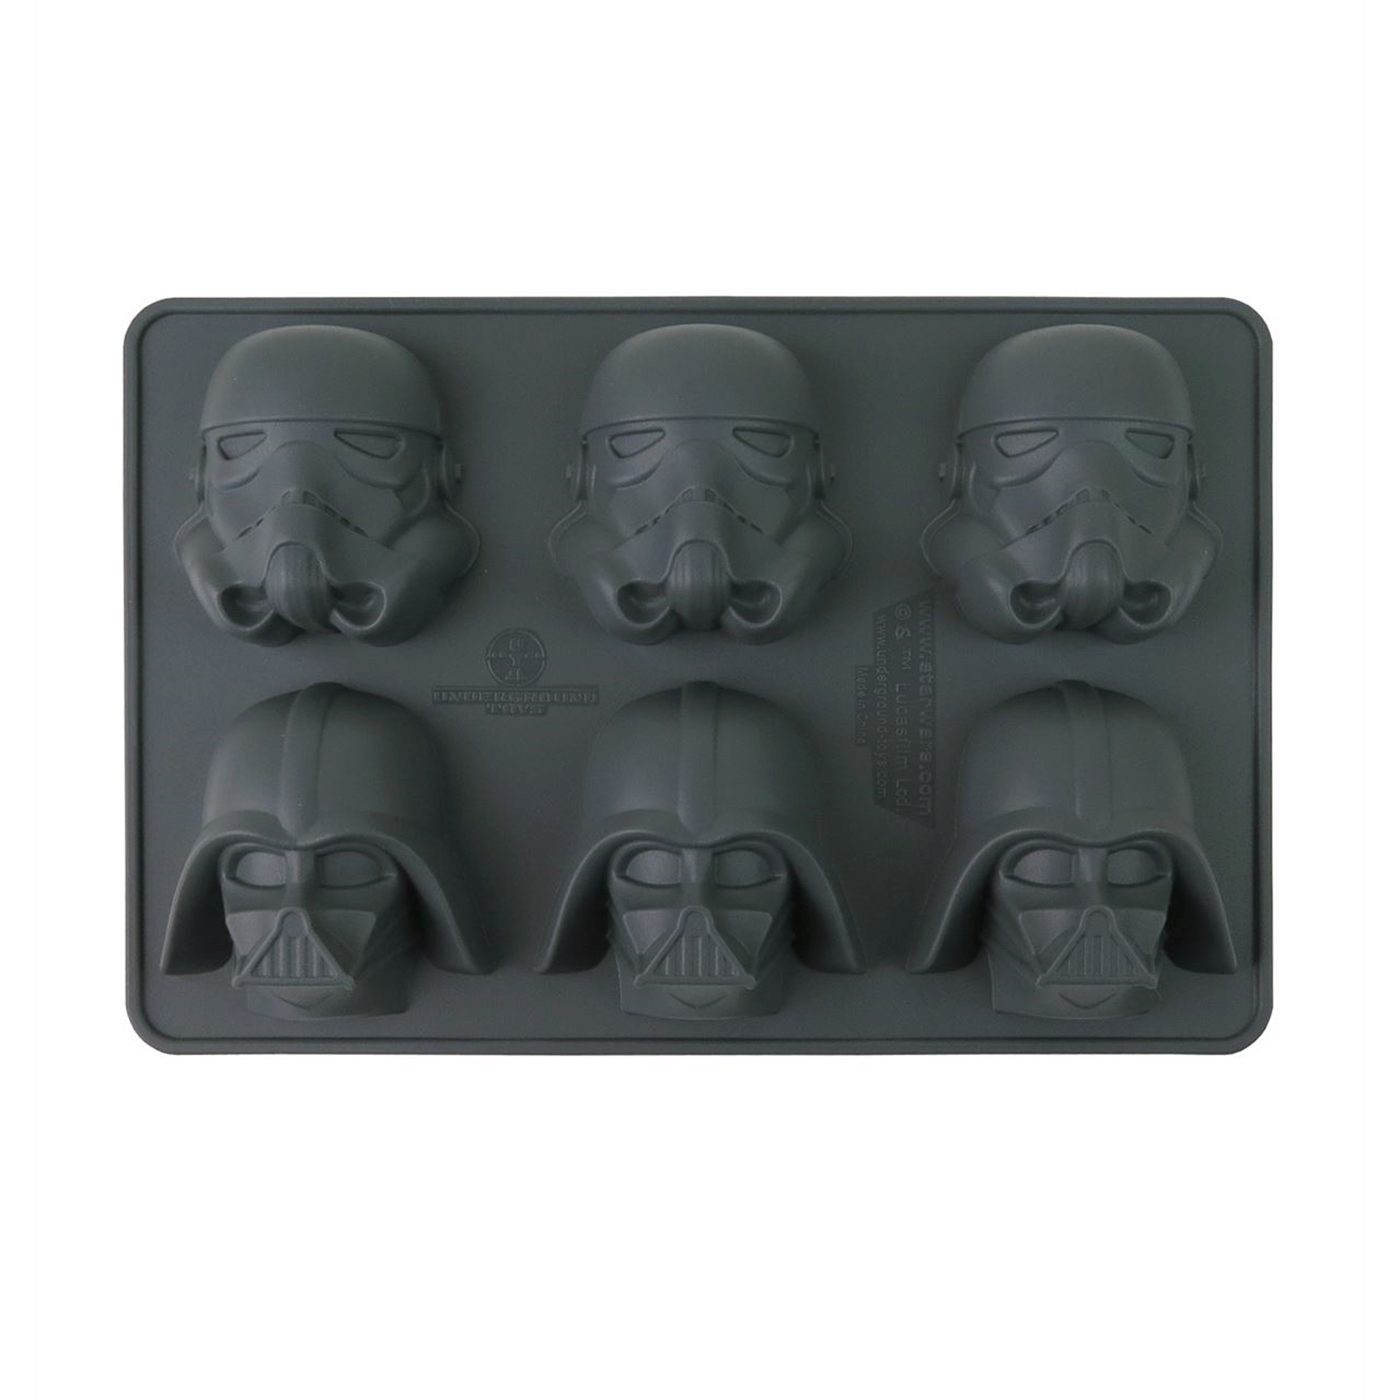 Star Wars Darth Vader & Stormtroopers Ice Cube Tray